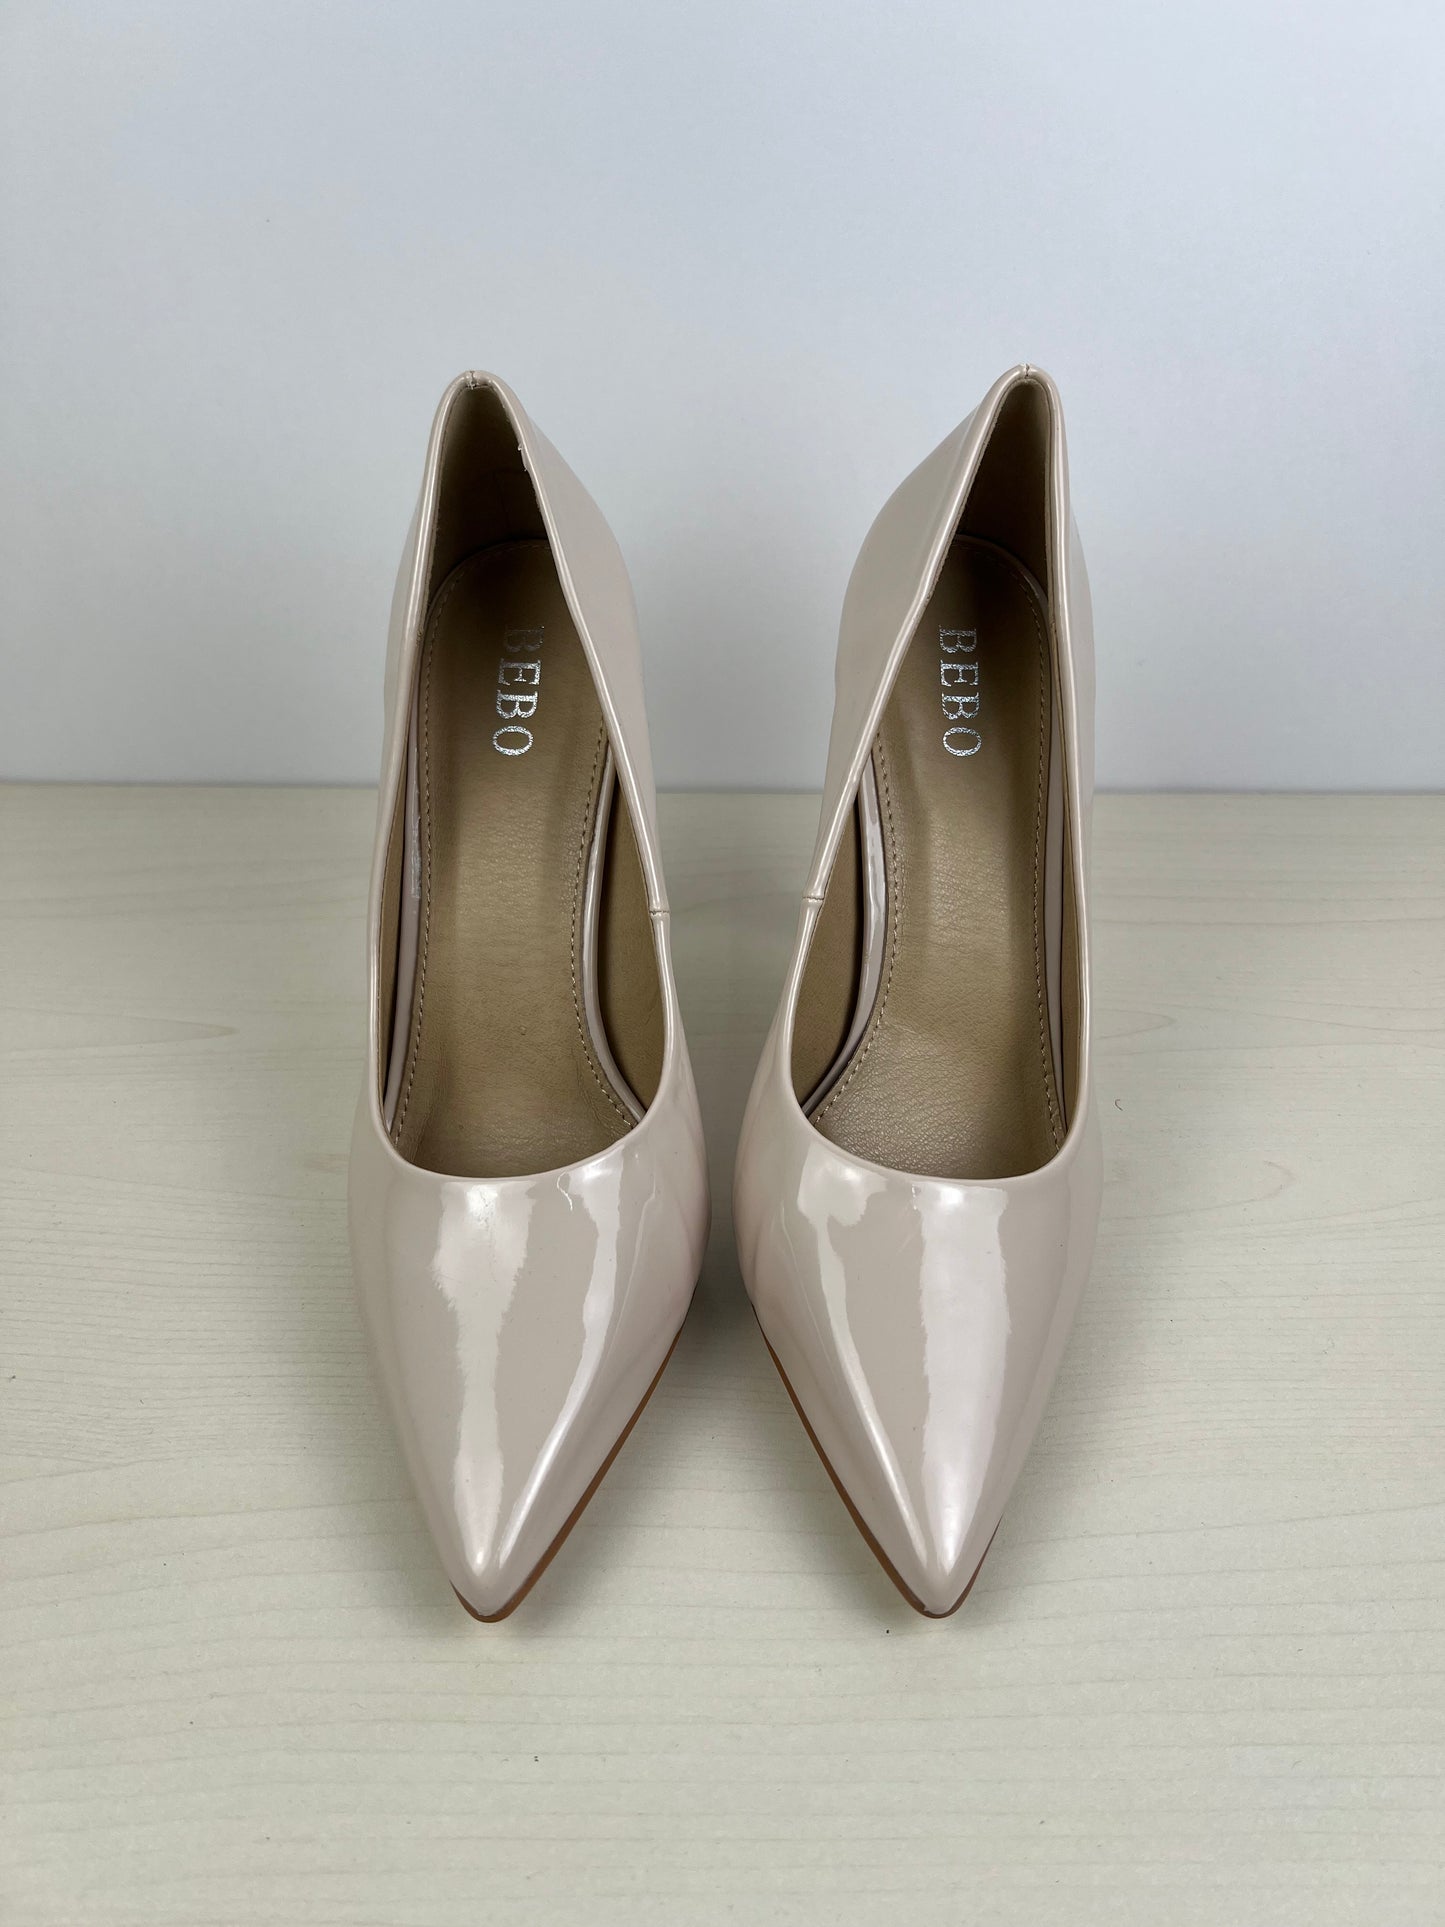 Shoes Heels Stiletto By Bebo  Size: 9.5